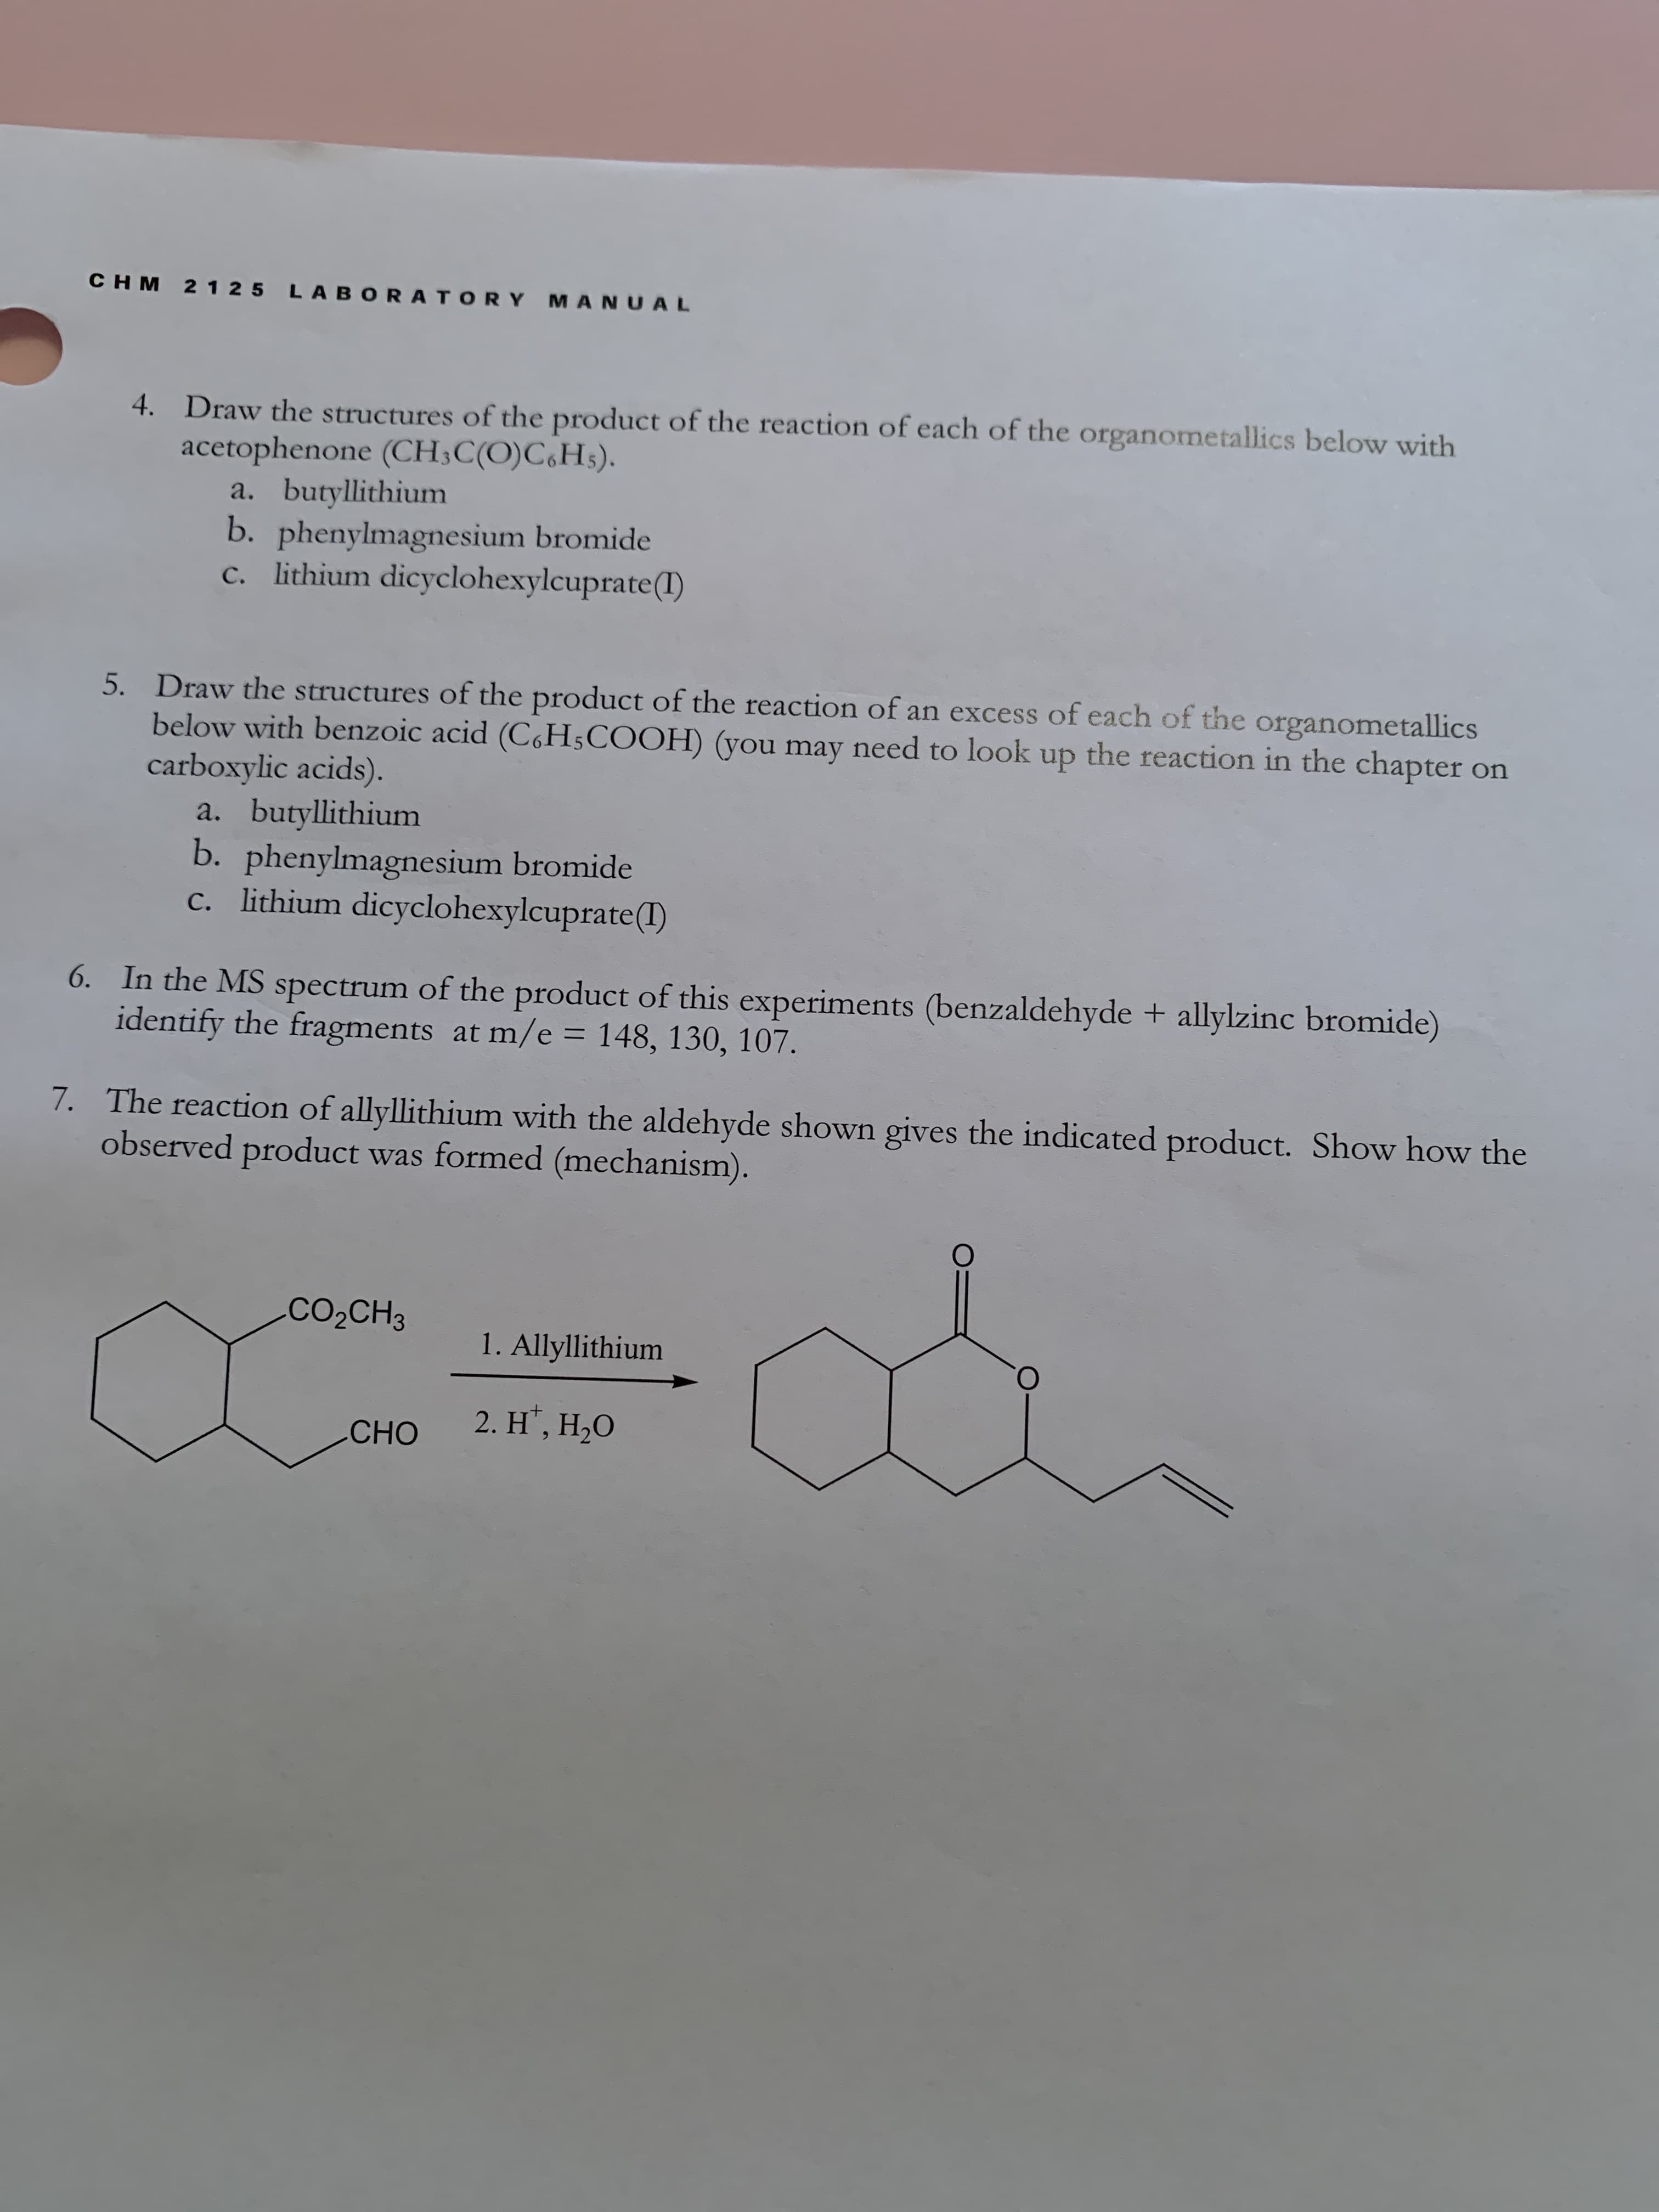 CHM 2 125 LABORAT ORY MANUAL
4. Draw the structures of the product of the reaction of each of the organometallics below with
acetophenone (CH;C(O)C,Hs).
a. butyllithium
b. phenylmagnesium bromide
c. lithium dicyclohexylcuprate(1)
5. Draw the structures of the product of the reaction of an excess of each of the organometallics
below with benzoic acid (C,H5COOH) (you may need to look up the reaction in the chapter on
carboxylic acids).
a. butyllithium
b. phenylmagnesium bromide
c. lithium dicyclohexylcuprate(I)
6. In the MS spectrum of the product of this experiments (benzaldehyde + allylzinc bromide)
identify the fragments at m/e = 148, 130, 107.
%3D
7. The reaction of allyllithium with the aldehyde shown gives the indicated product. Show how the
observed product was formed (mechanism).
CO2CH3
1. Allyllithium
2. H', Н,О
CНО
